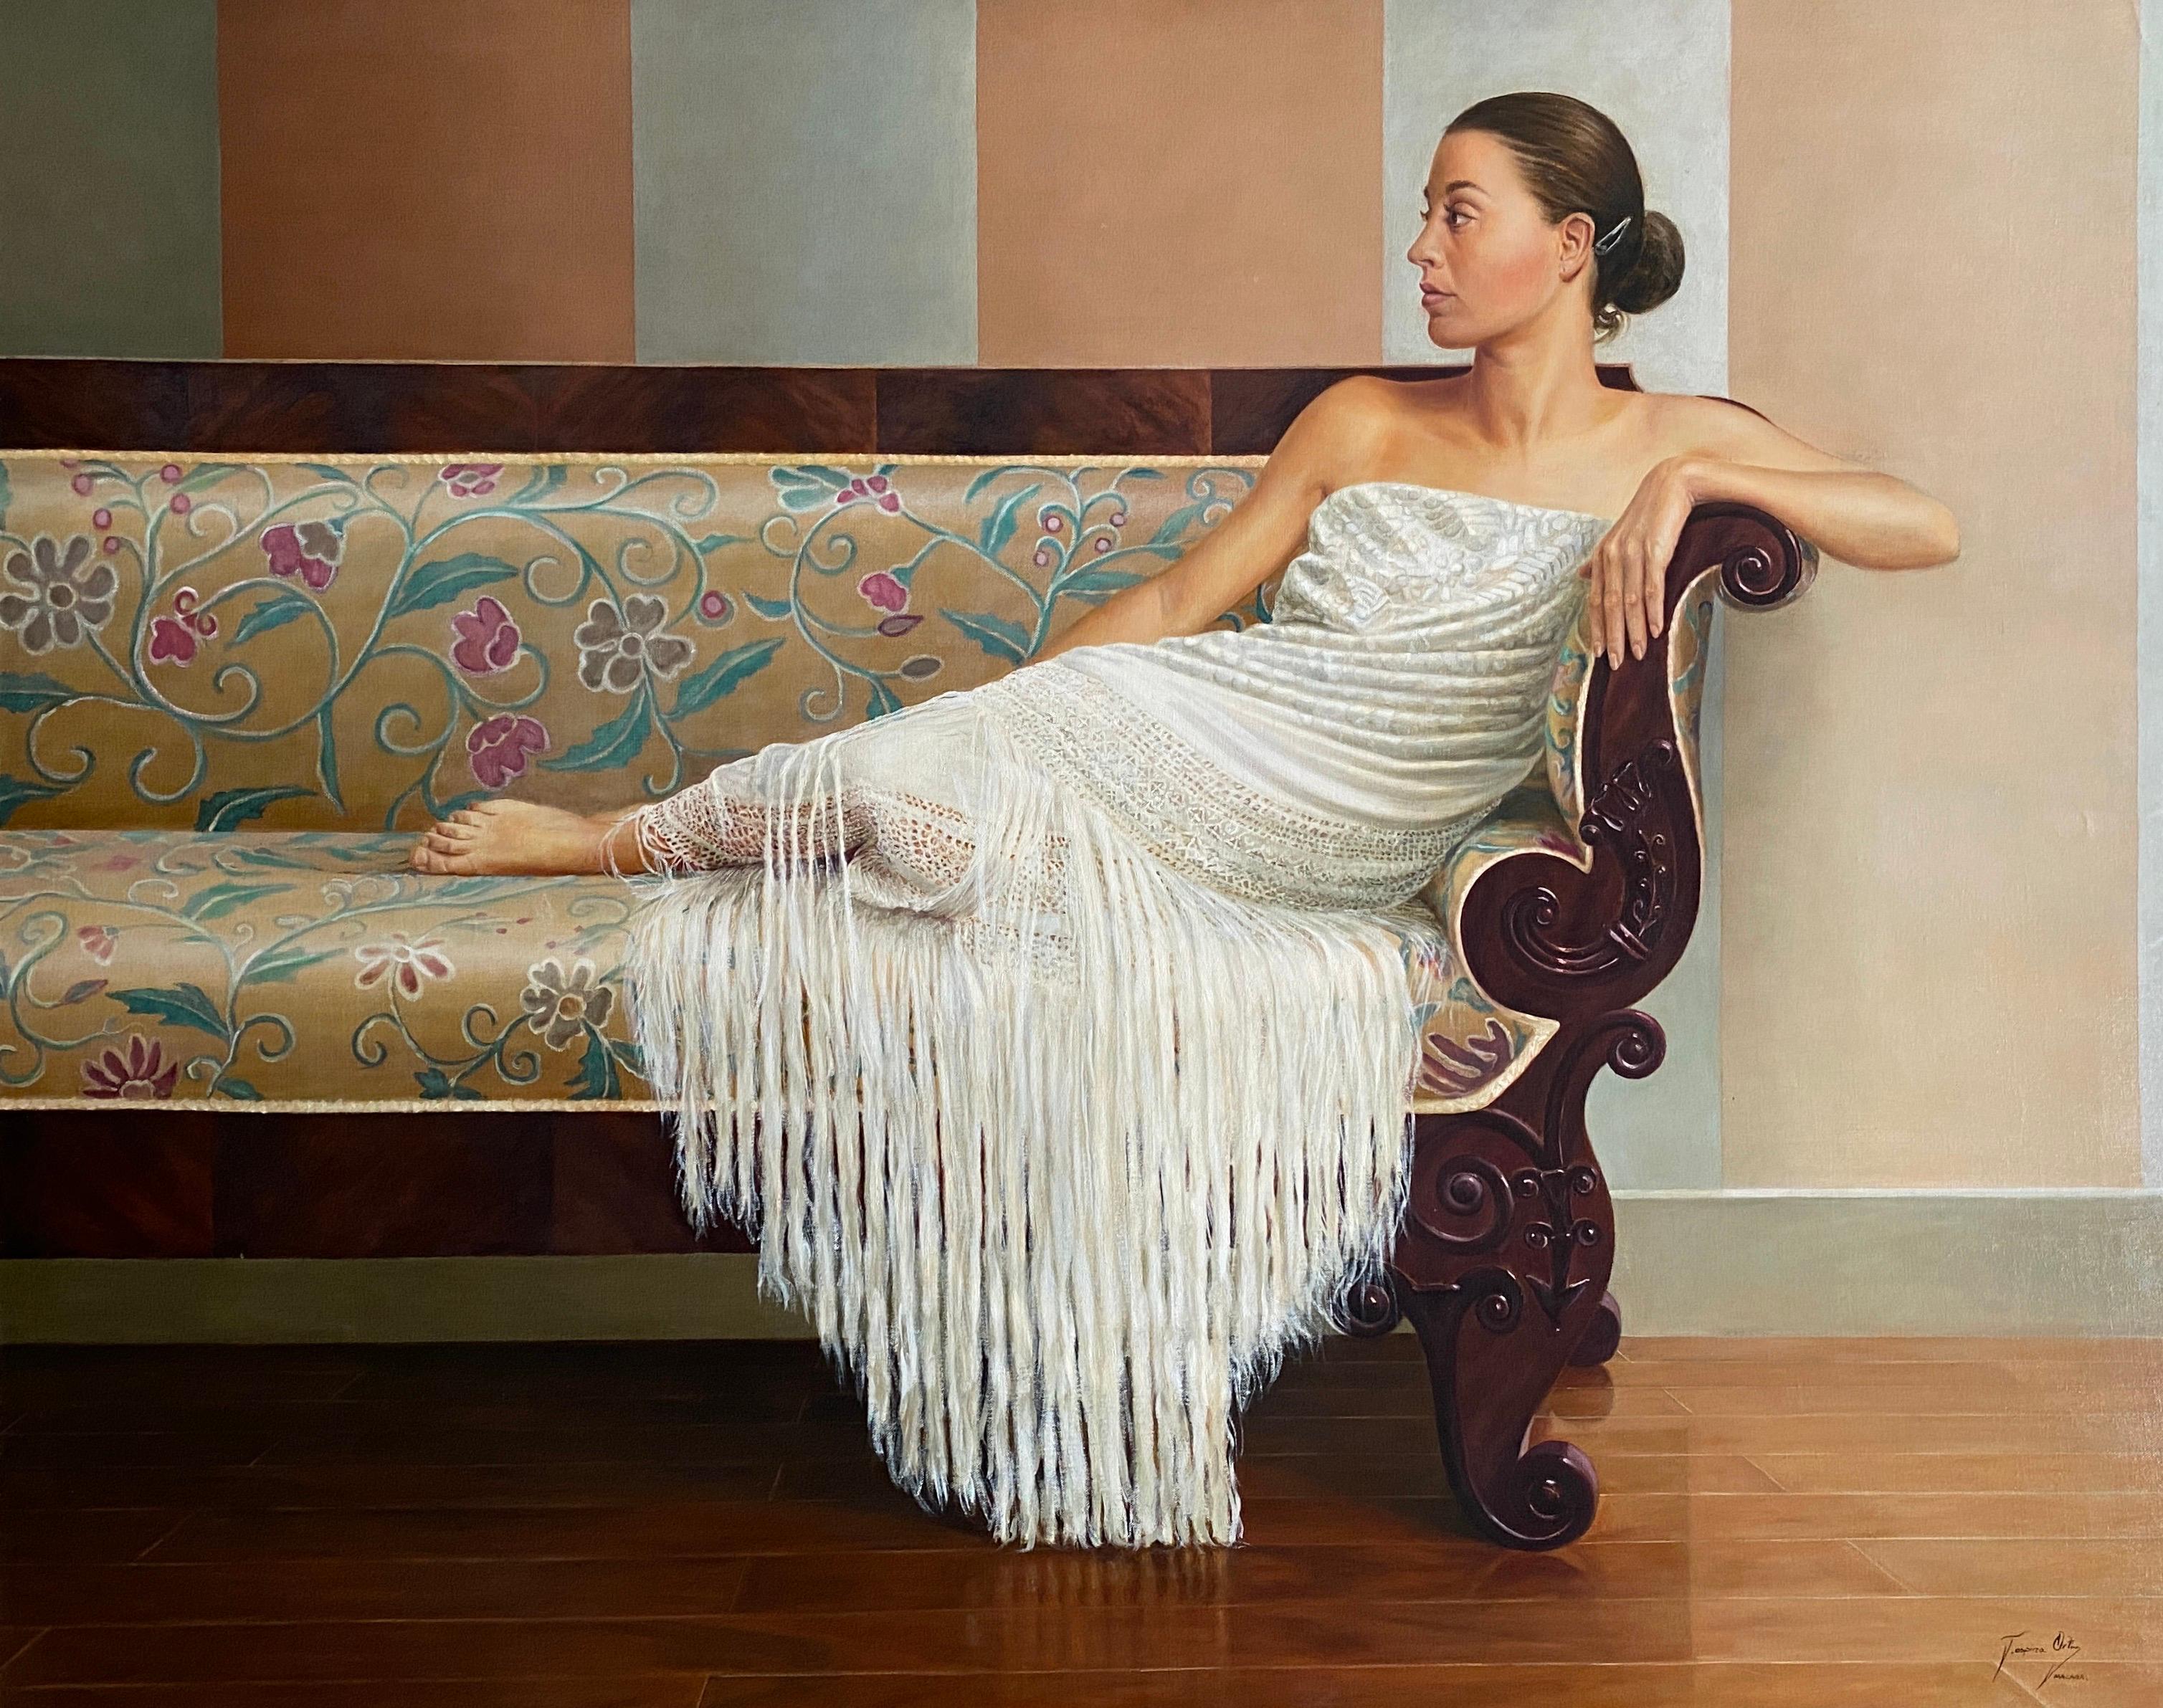 Ospina Ortiz Portrait Painting - Serenity (Serenidad). Spanish Contemporary Figurative Realism. Oil on canvas